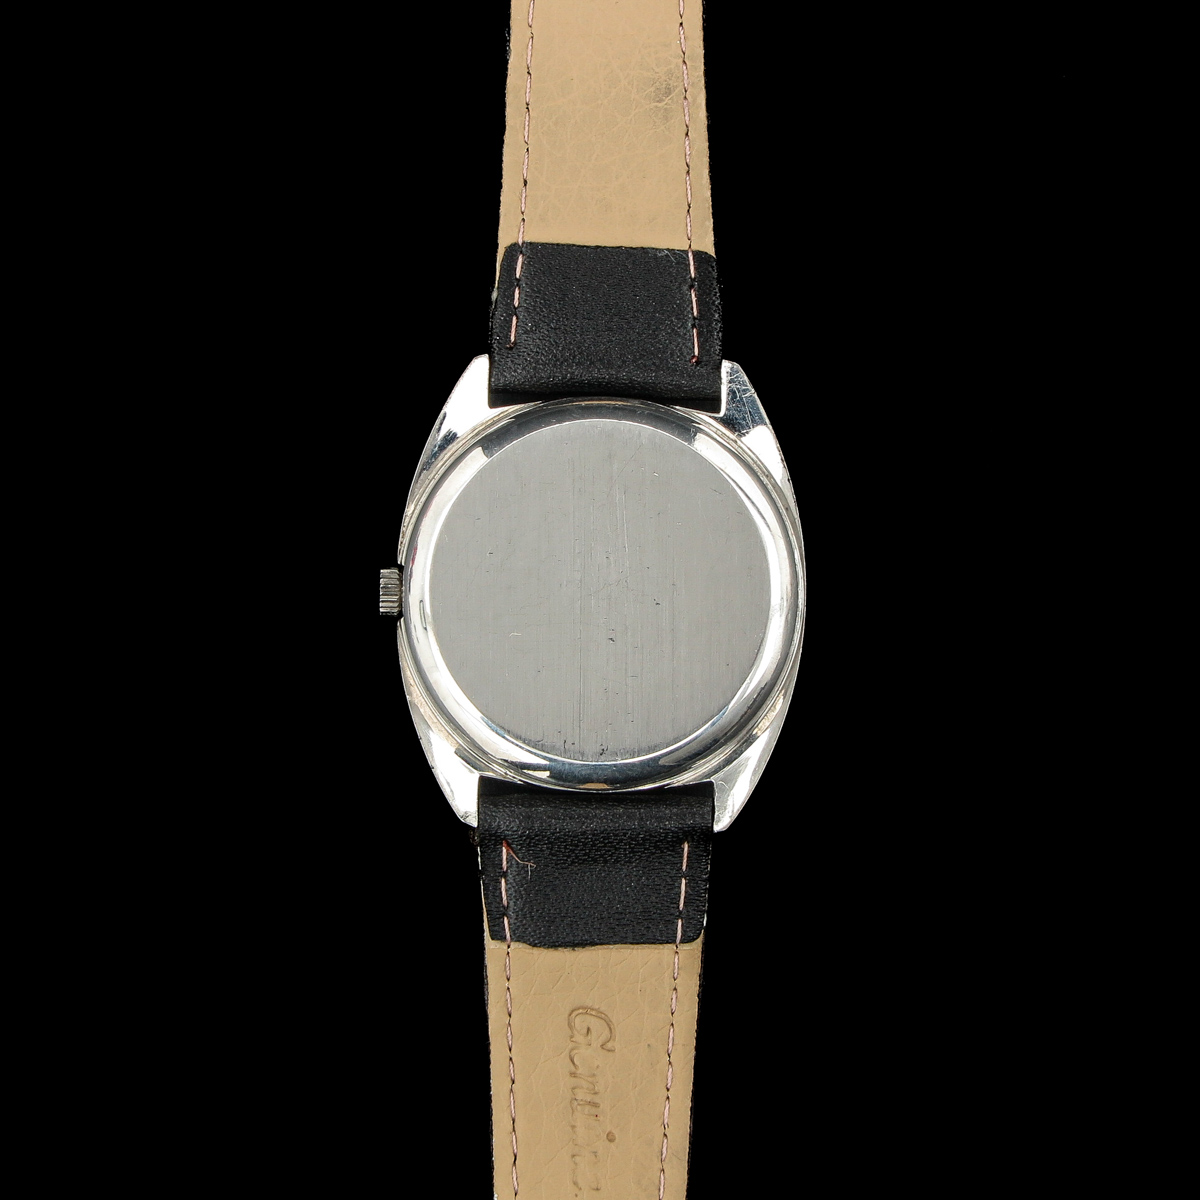 A Mens Omega Watch - Image 4 of 6